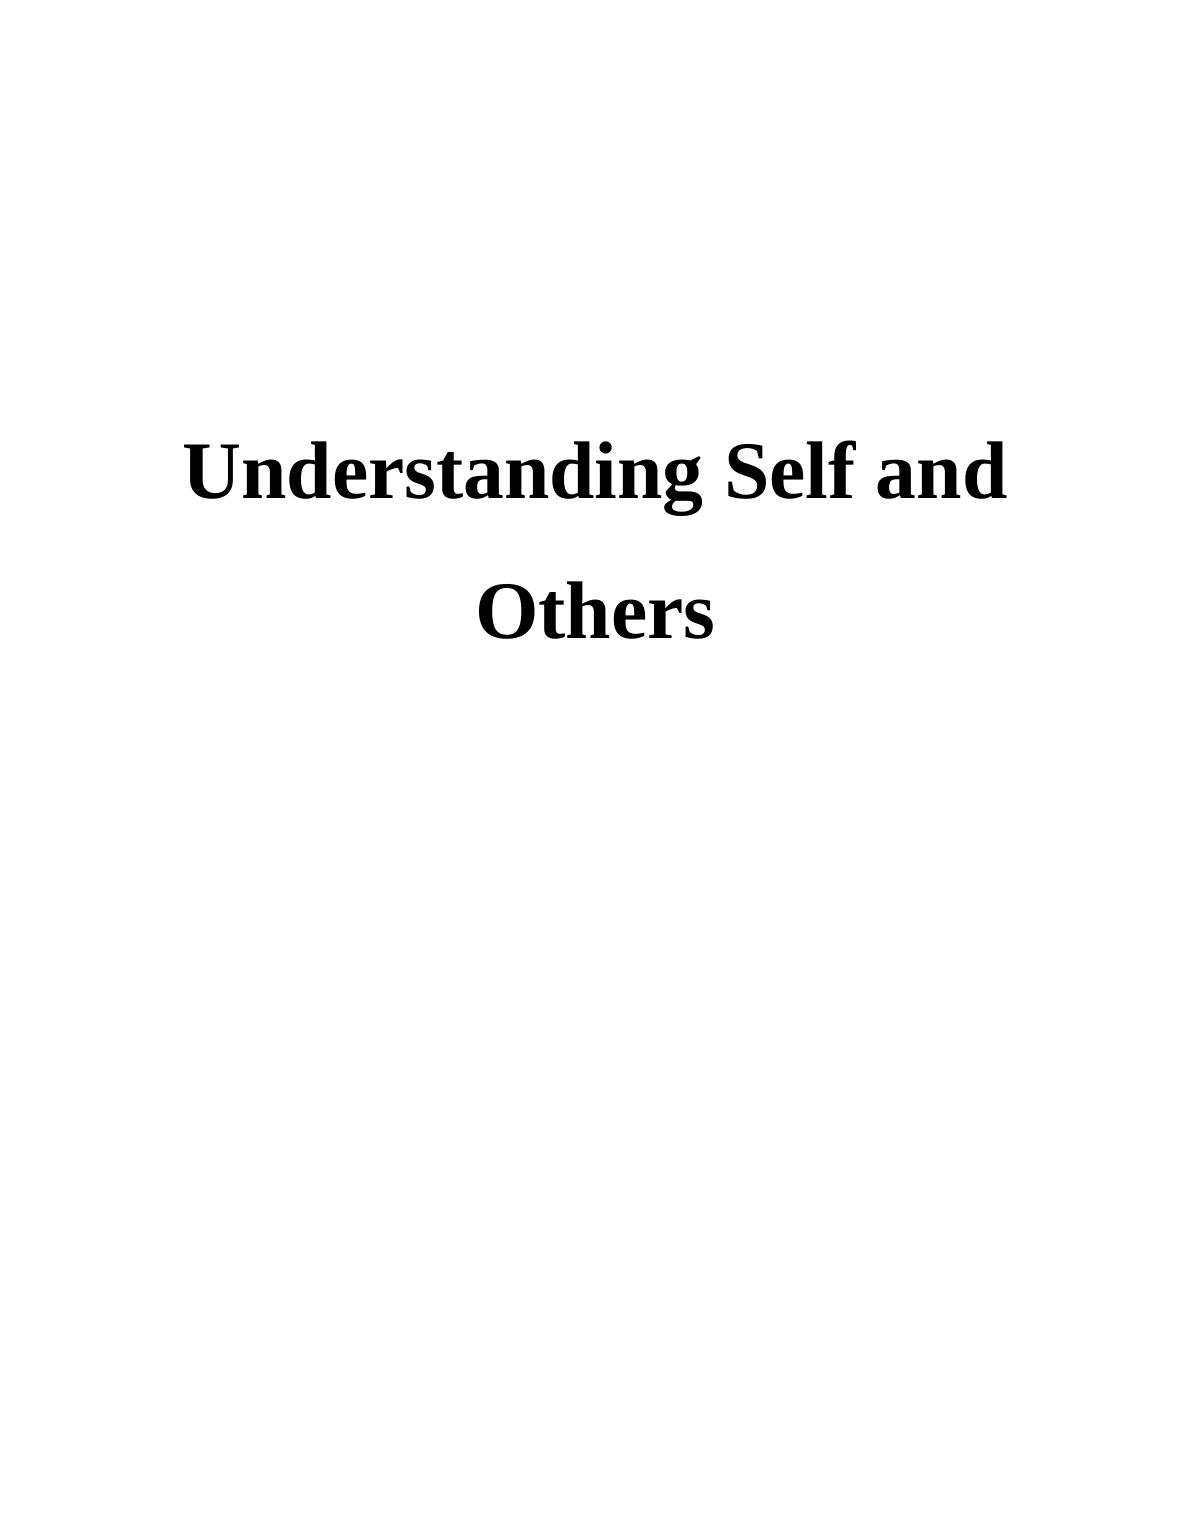 Understanding Self and Others (DOC)_1